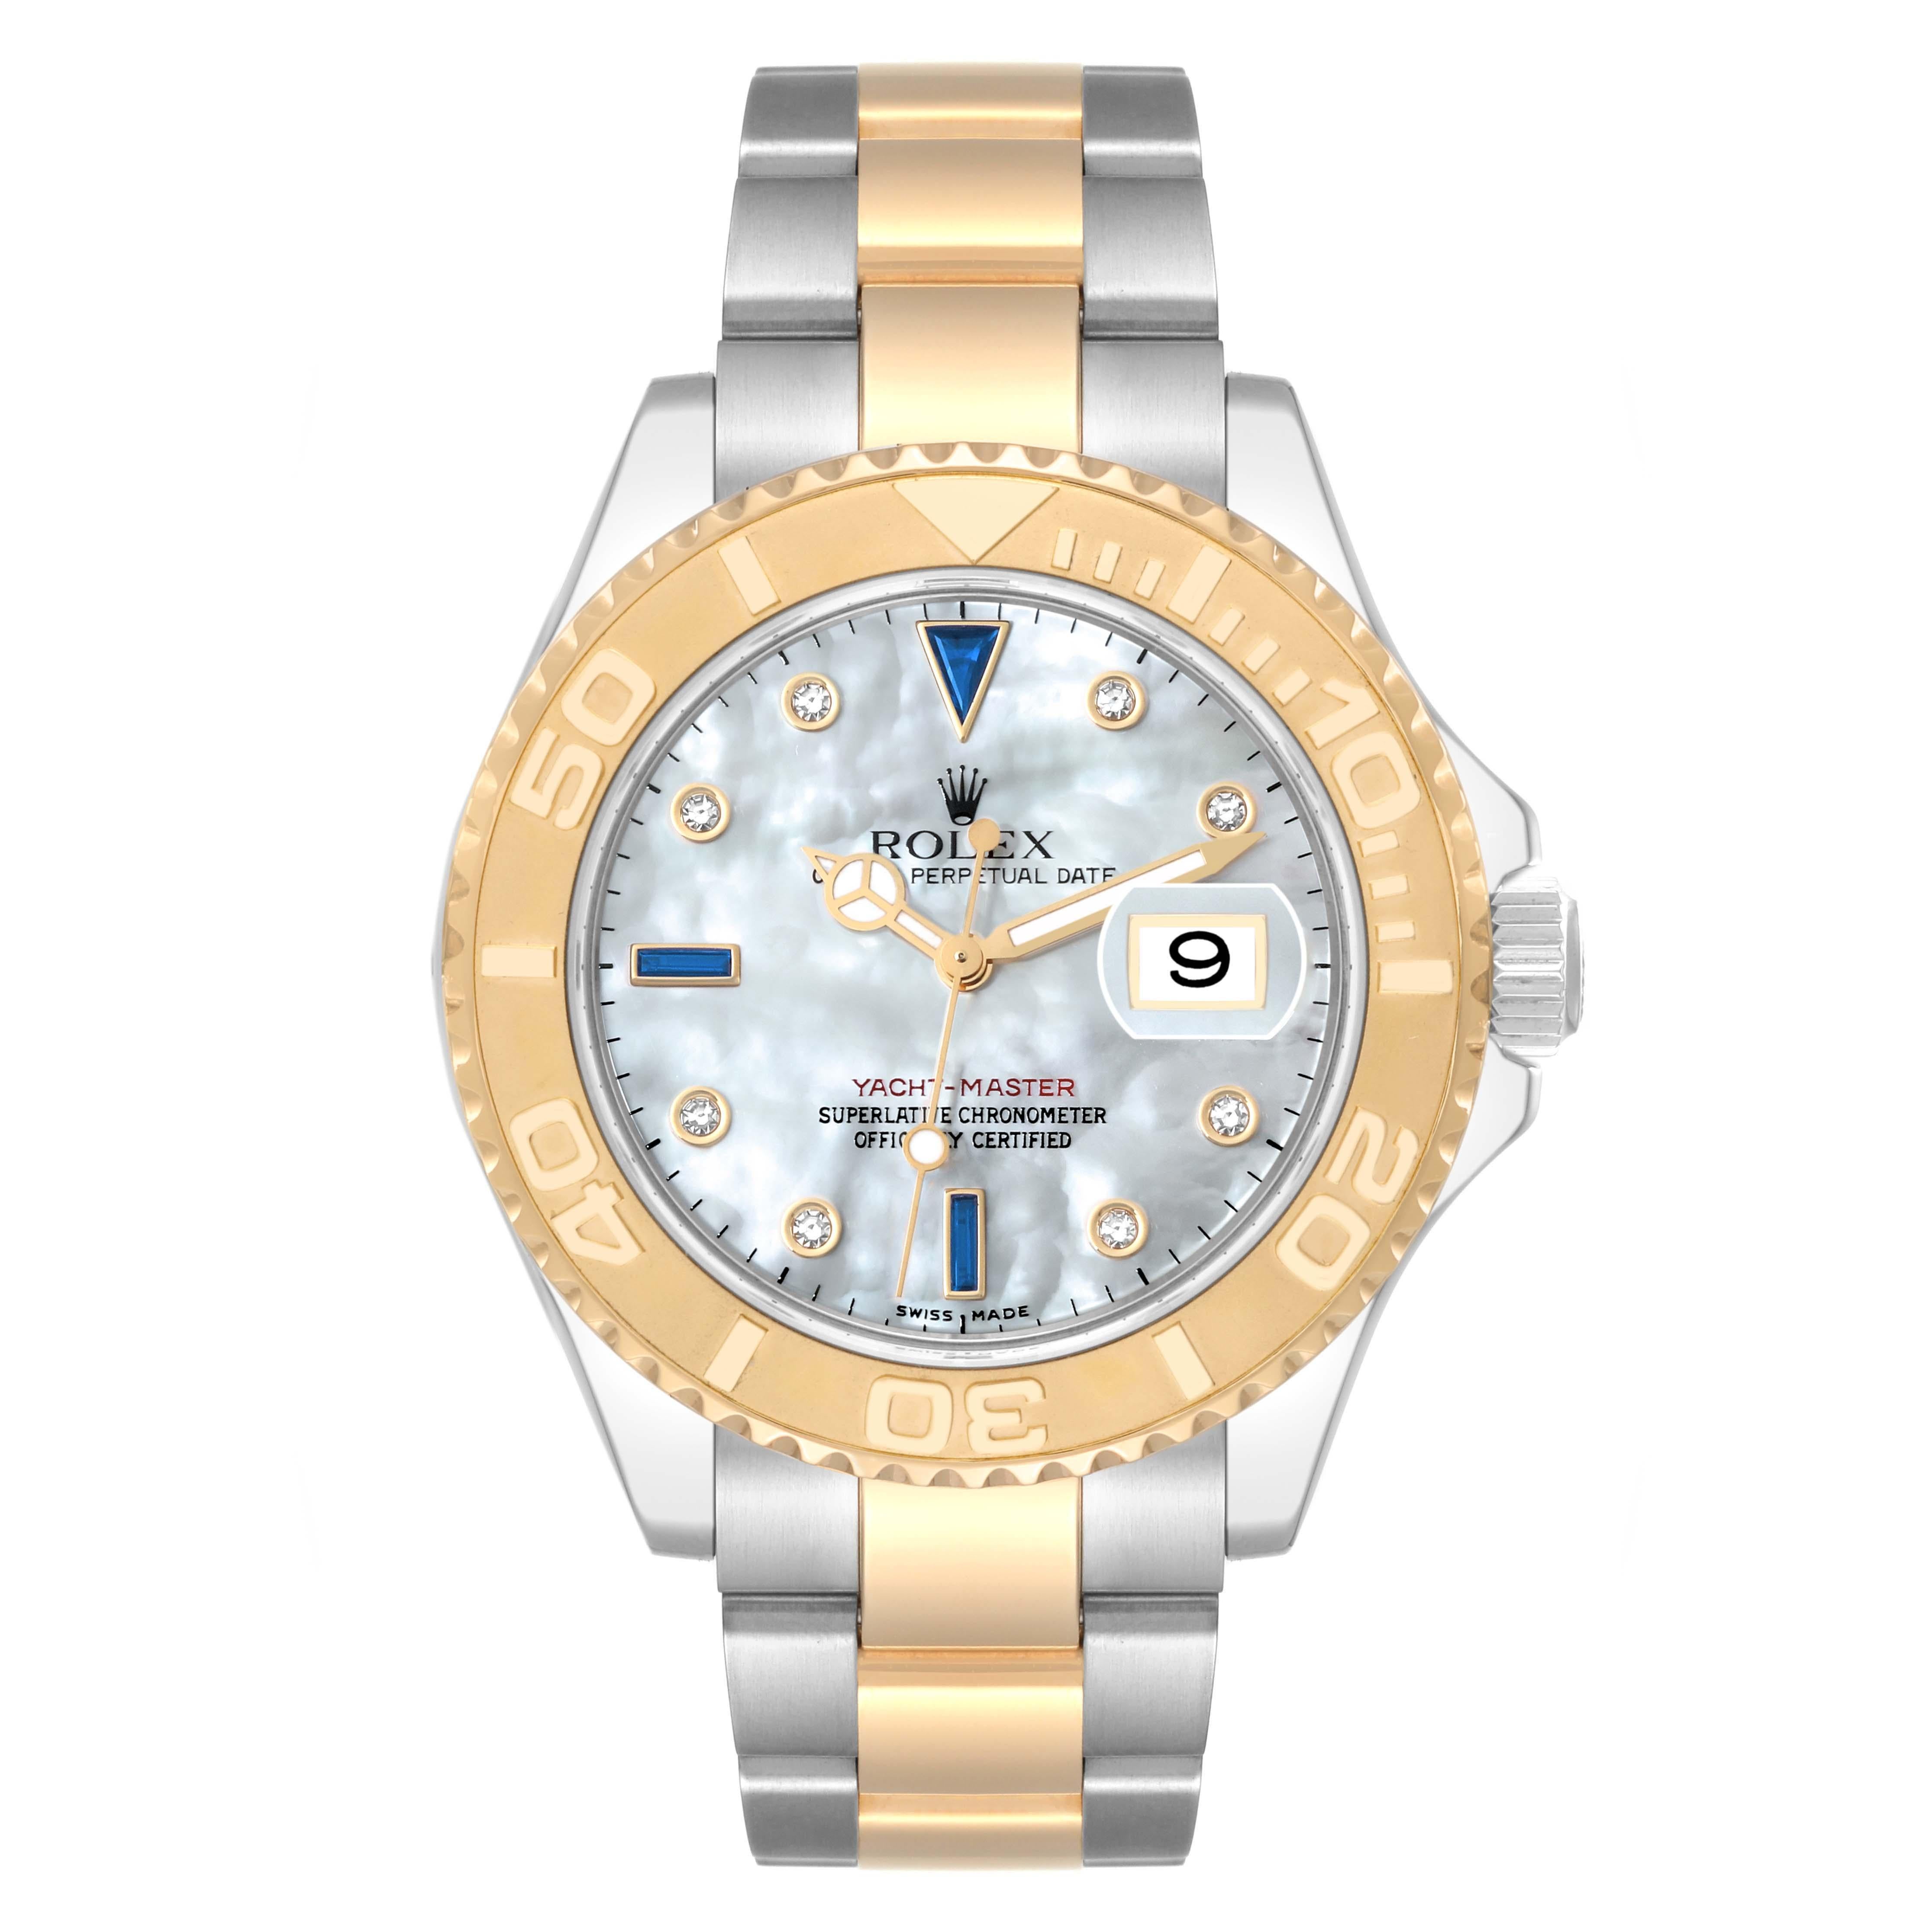 Rolex Yachtmaster Steel Yellow Gold Diamond Sapphire Serti Mens Watch 16623. Officially certified chronometer self-winding movement. Stainless steel case 40.0 mm in diameter. Rolex logo on a crown. 18k yellow gold special time-lapse unidirectional